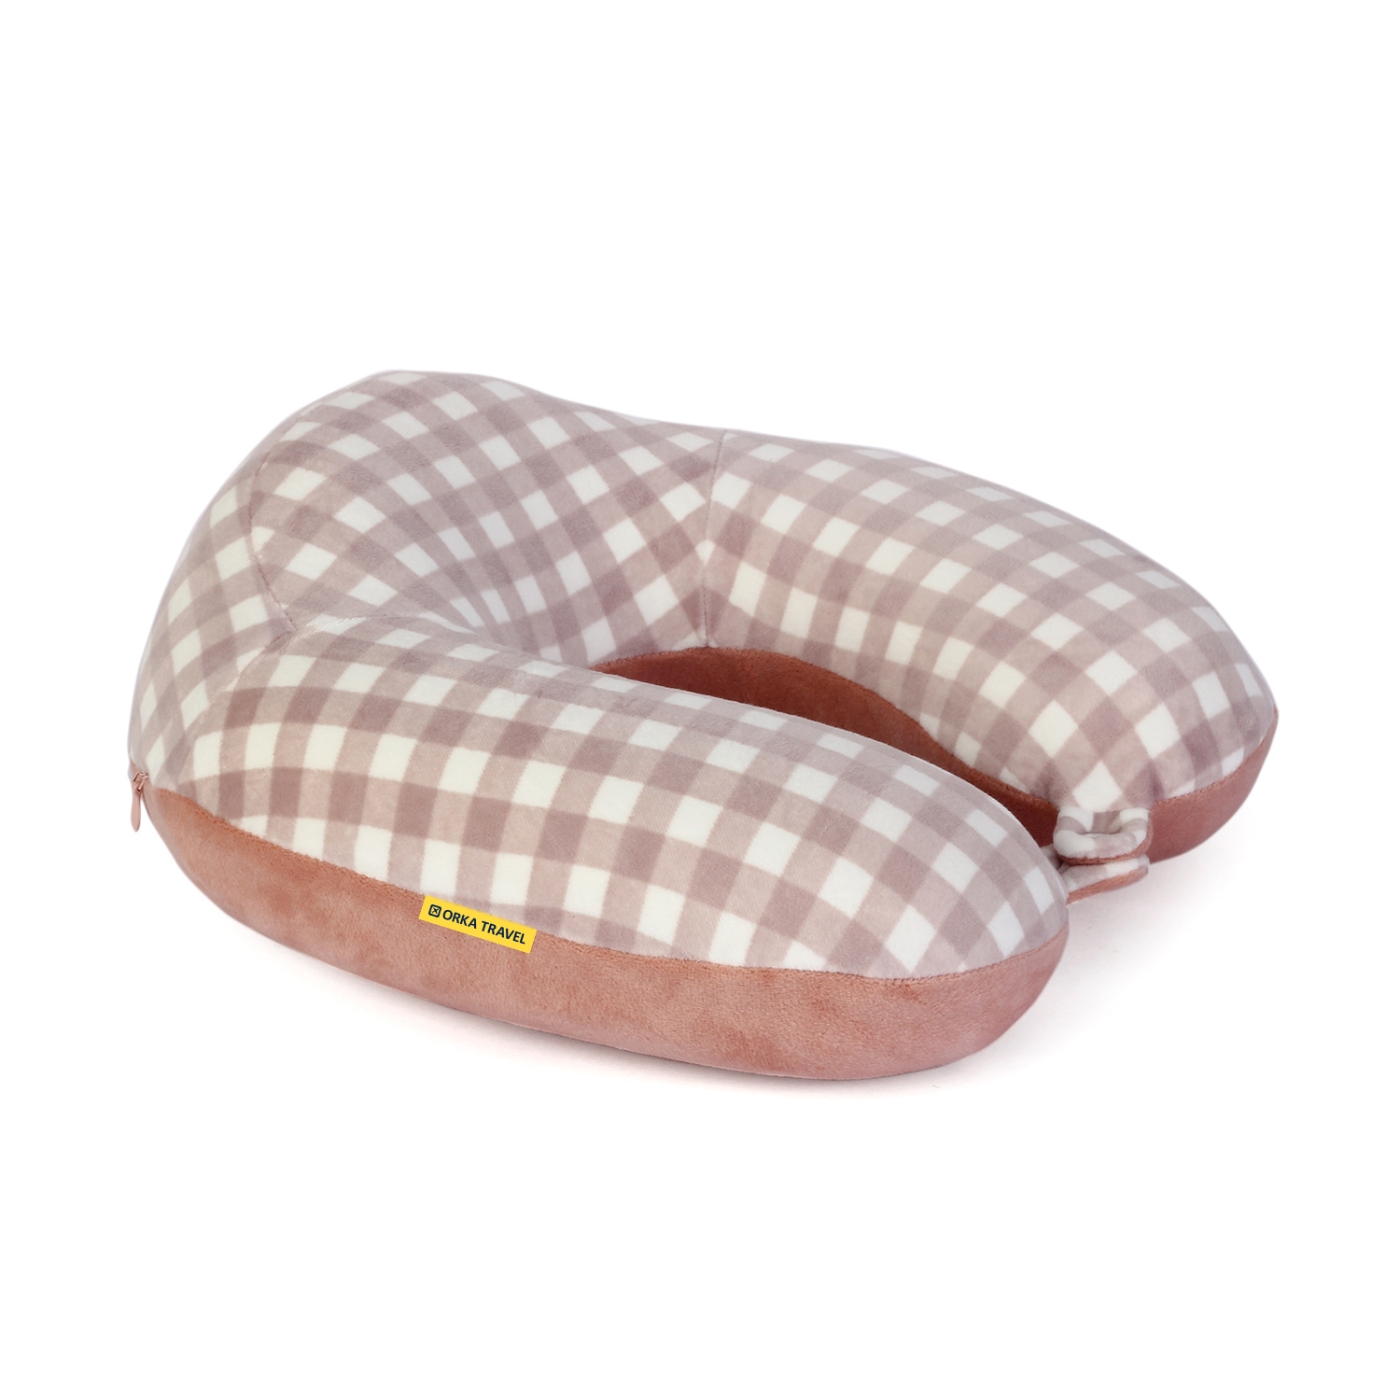 ORKA TRAVEL Cheque Classic Special Thermo Sensitive Memory Foam U Shaped Travel Neck Pillow - Brown And White